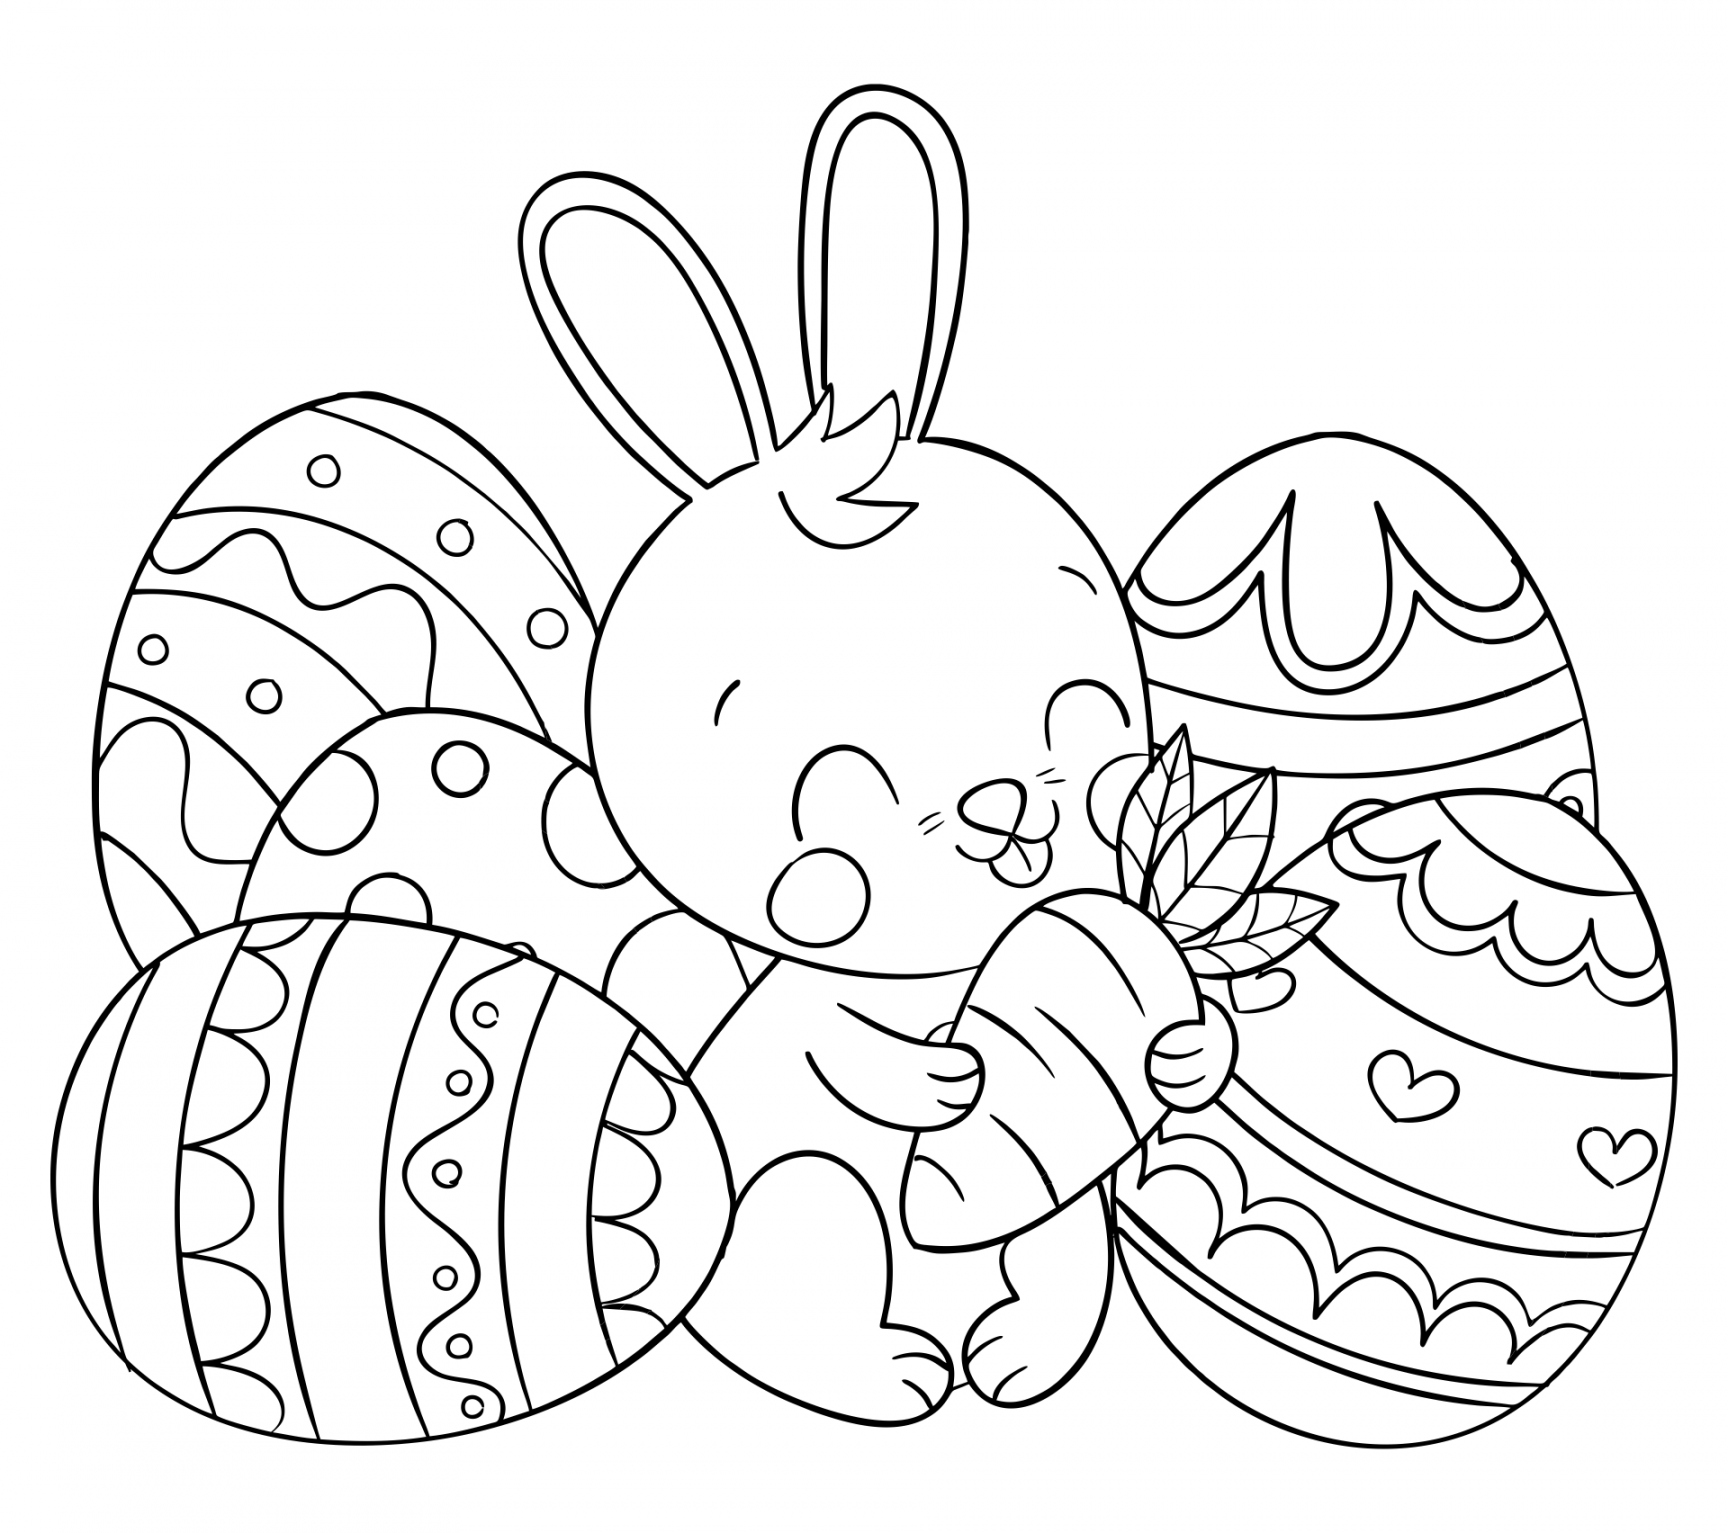 Free Easter Printable Coloring Pages - Printable -  Best Free Printable Easter Egg Coloring Page - printablee